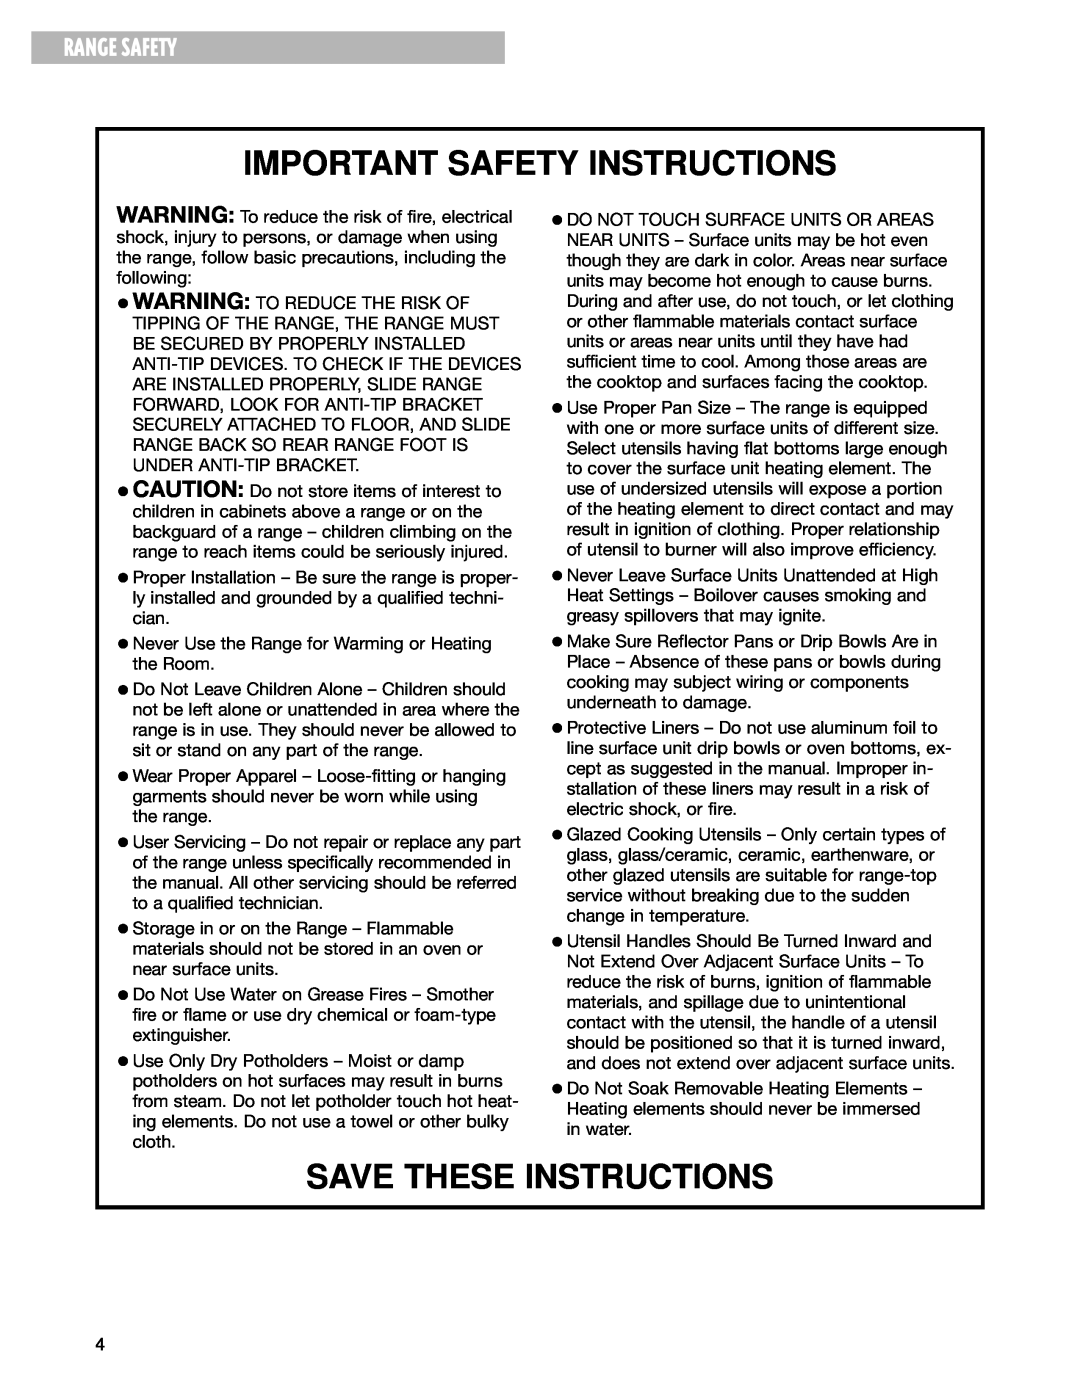 Whirlpool RF325PXG warranty Important Safety Instructions, Save These Instructions, Range Safety 